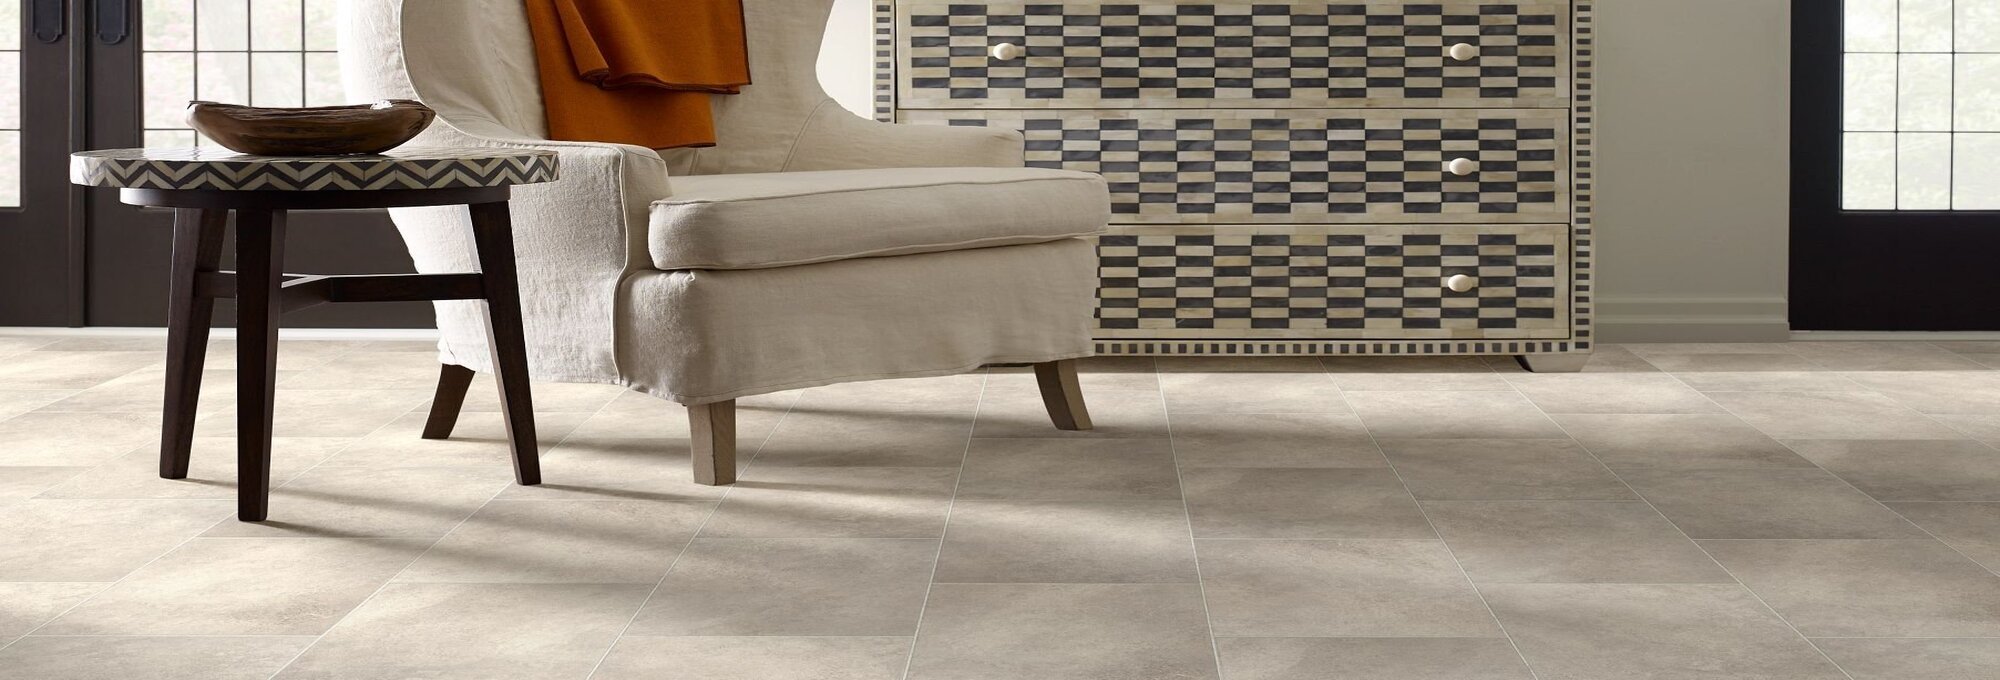 Armchair and table on tile - Diamond Floor Covering in Monroe